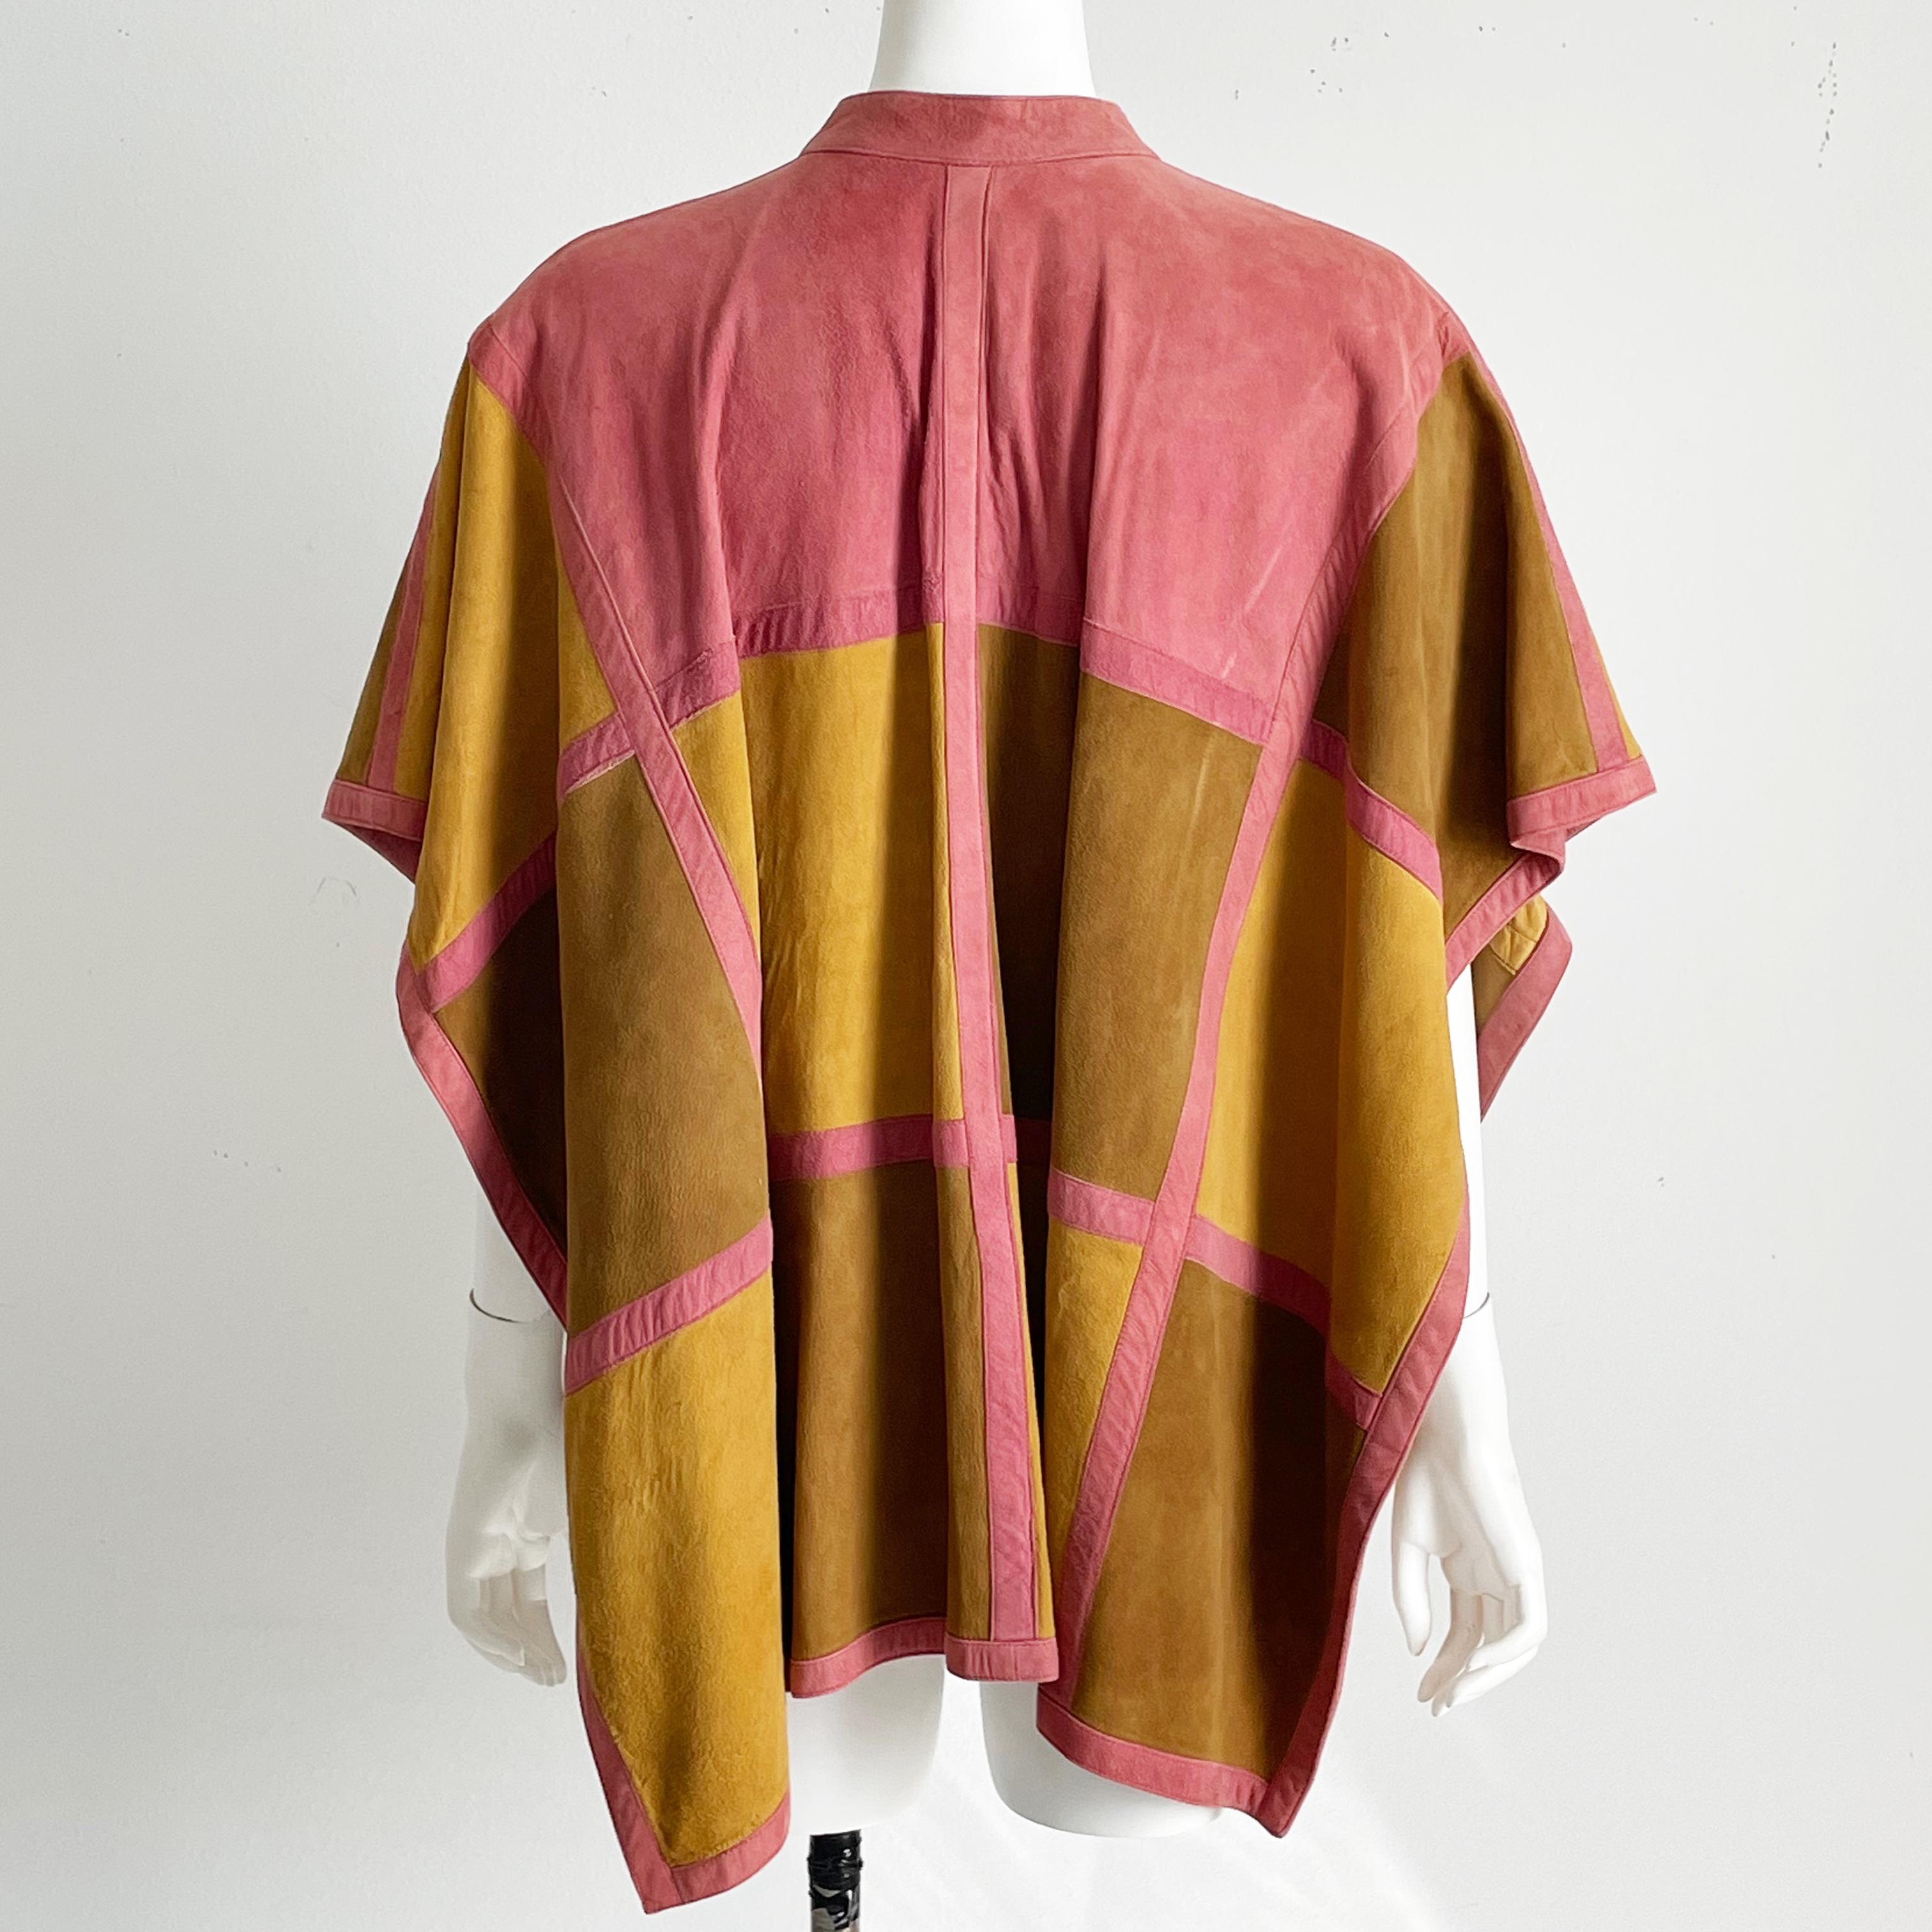 Bonnie Cashin for Sills Poncho Cape Suede Patchwork Pink Olive Vintage 70s S/M For Sale 4